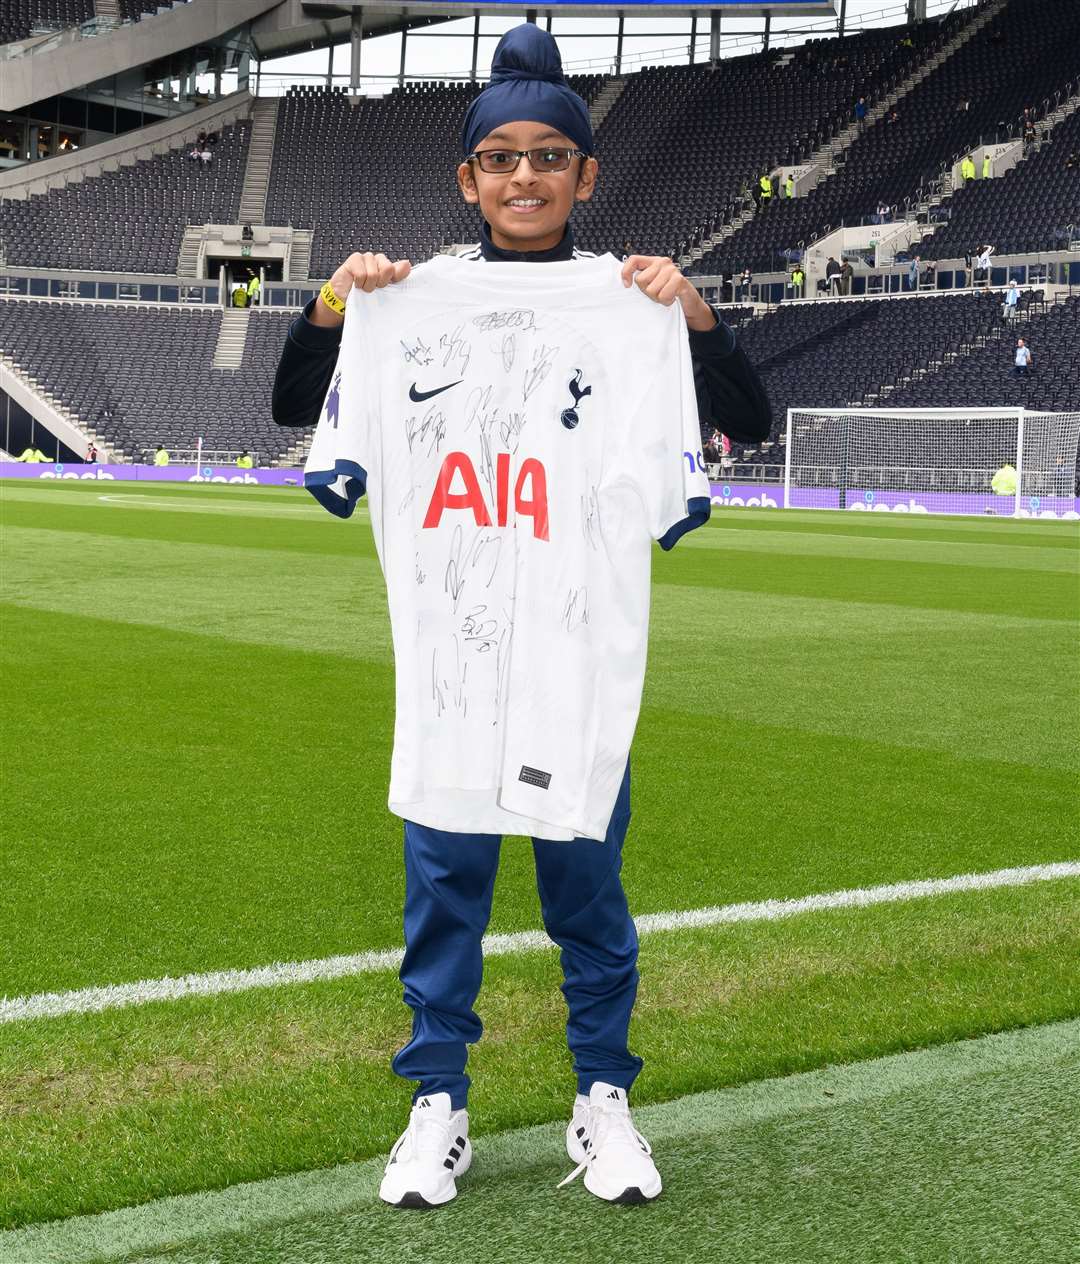 Jeevan with his signed shirt